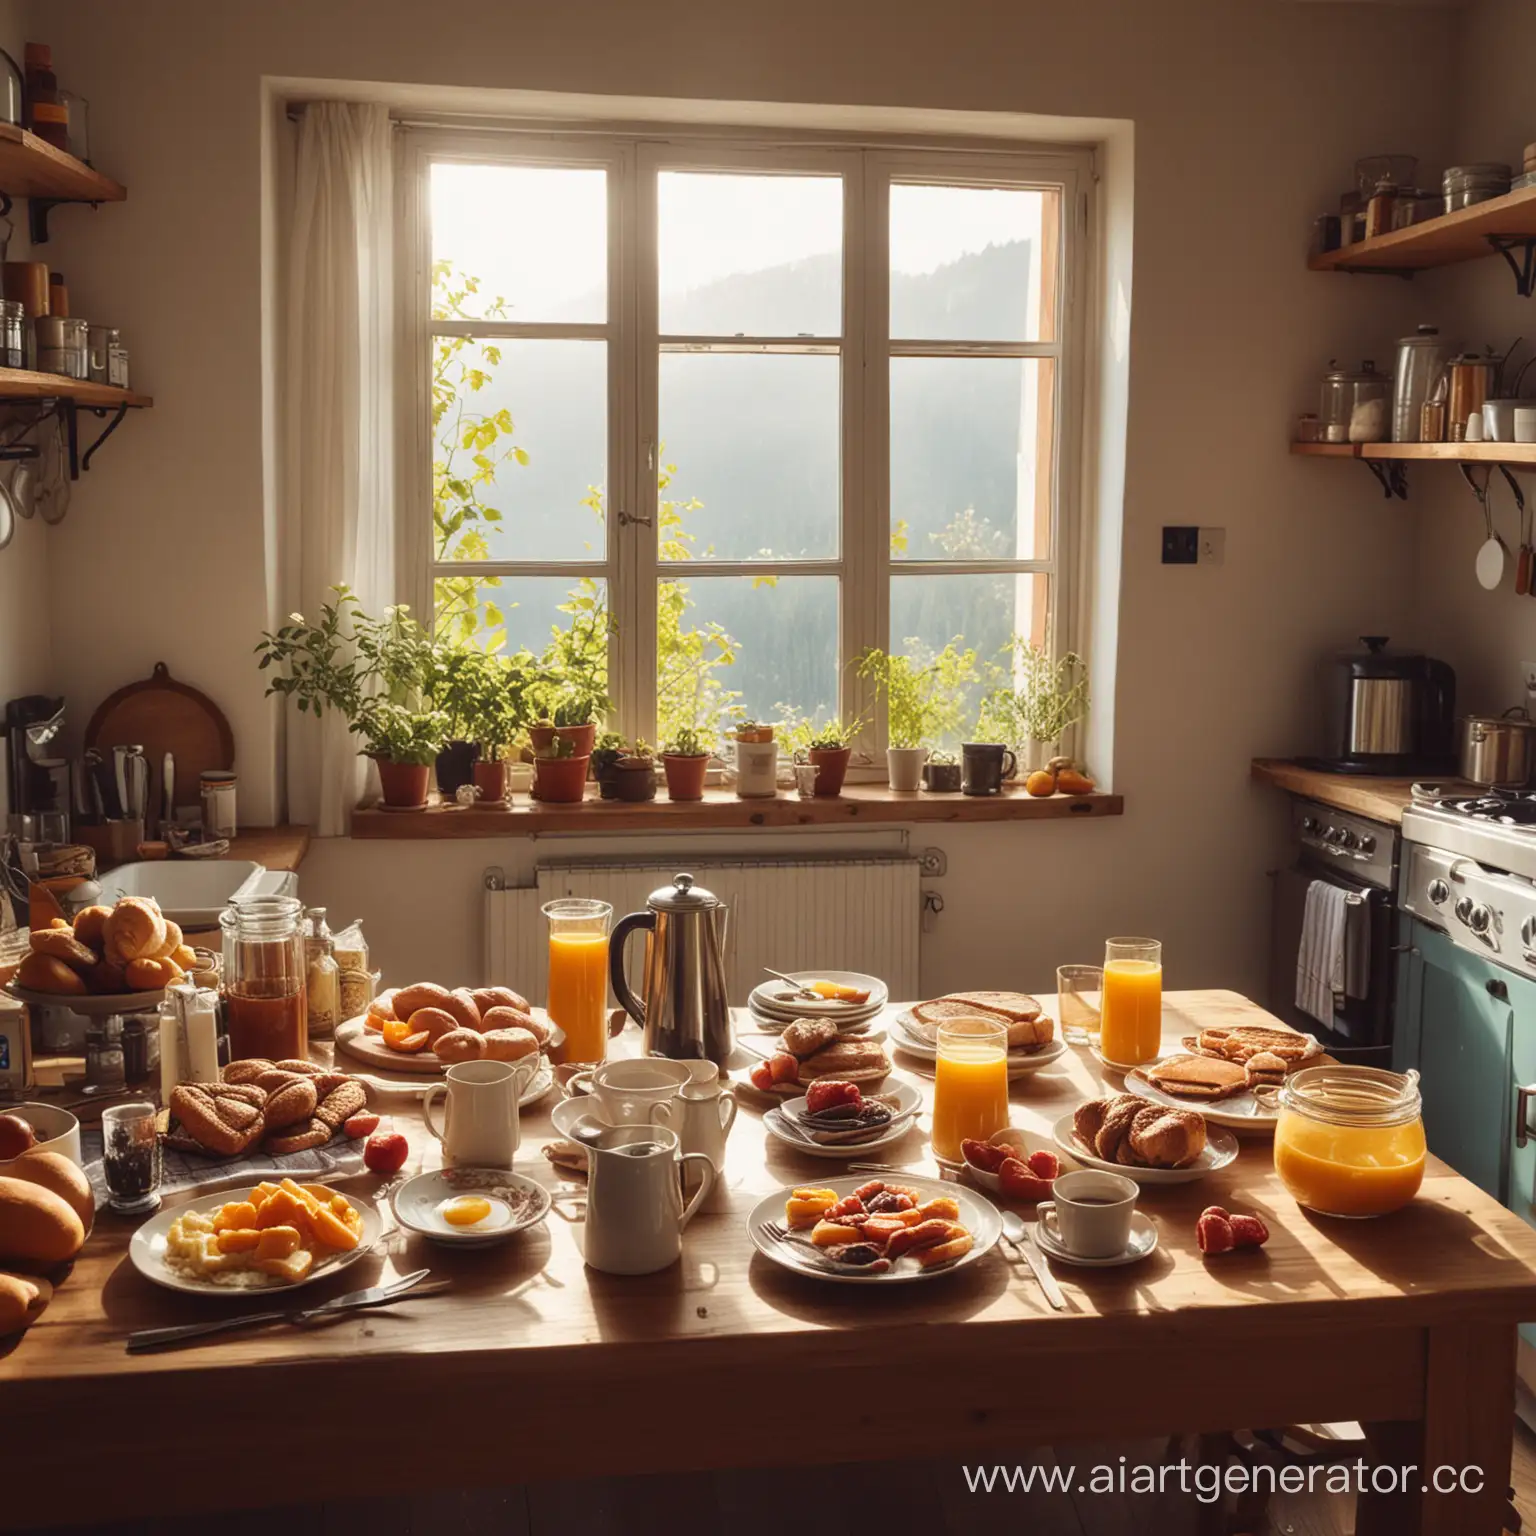 Magical-Breakfast-with-Proper-Products-Energizing-Coziness-in-the-Kitchen